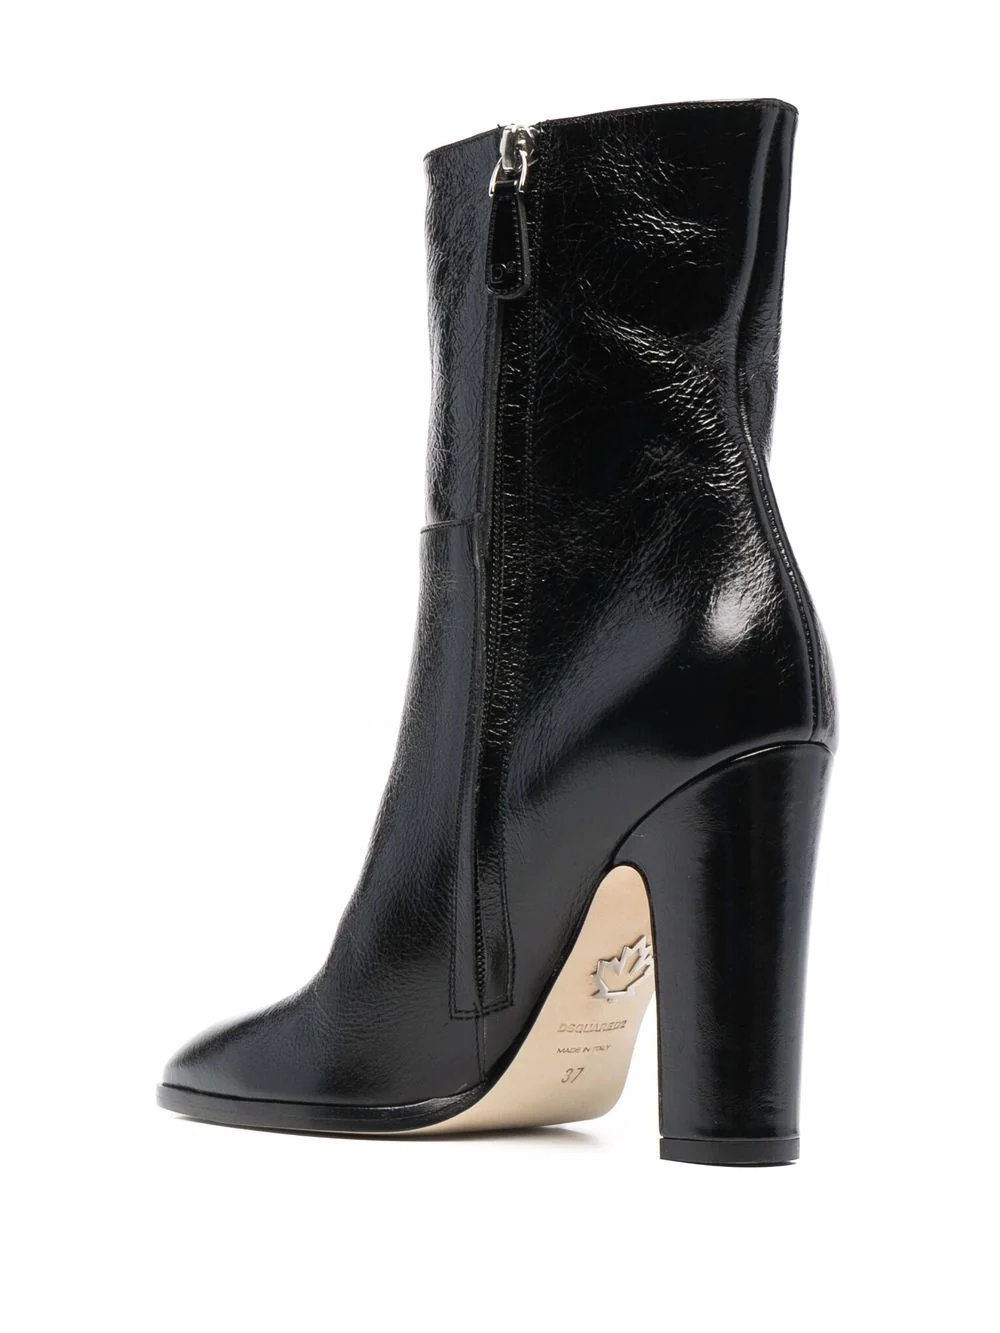 logo-plaque high-heeled leather boots - 3